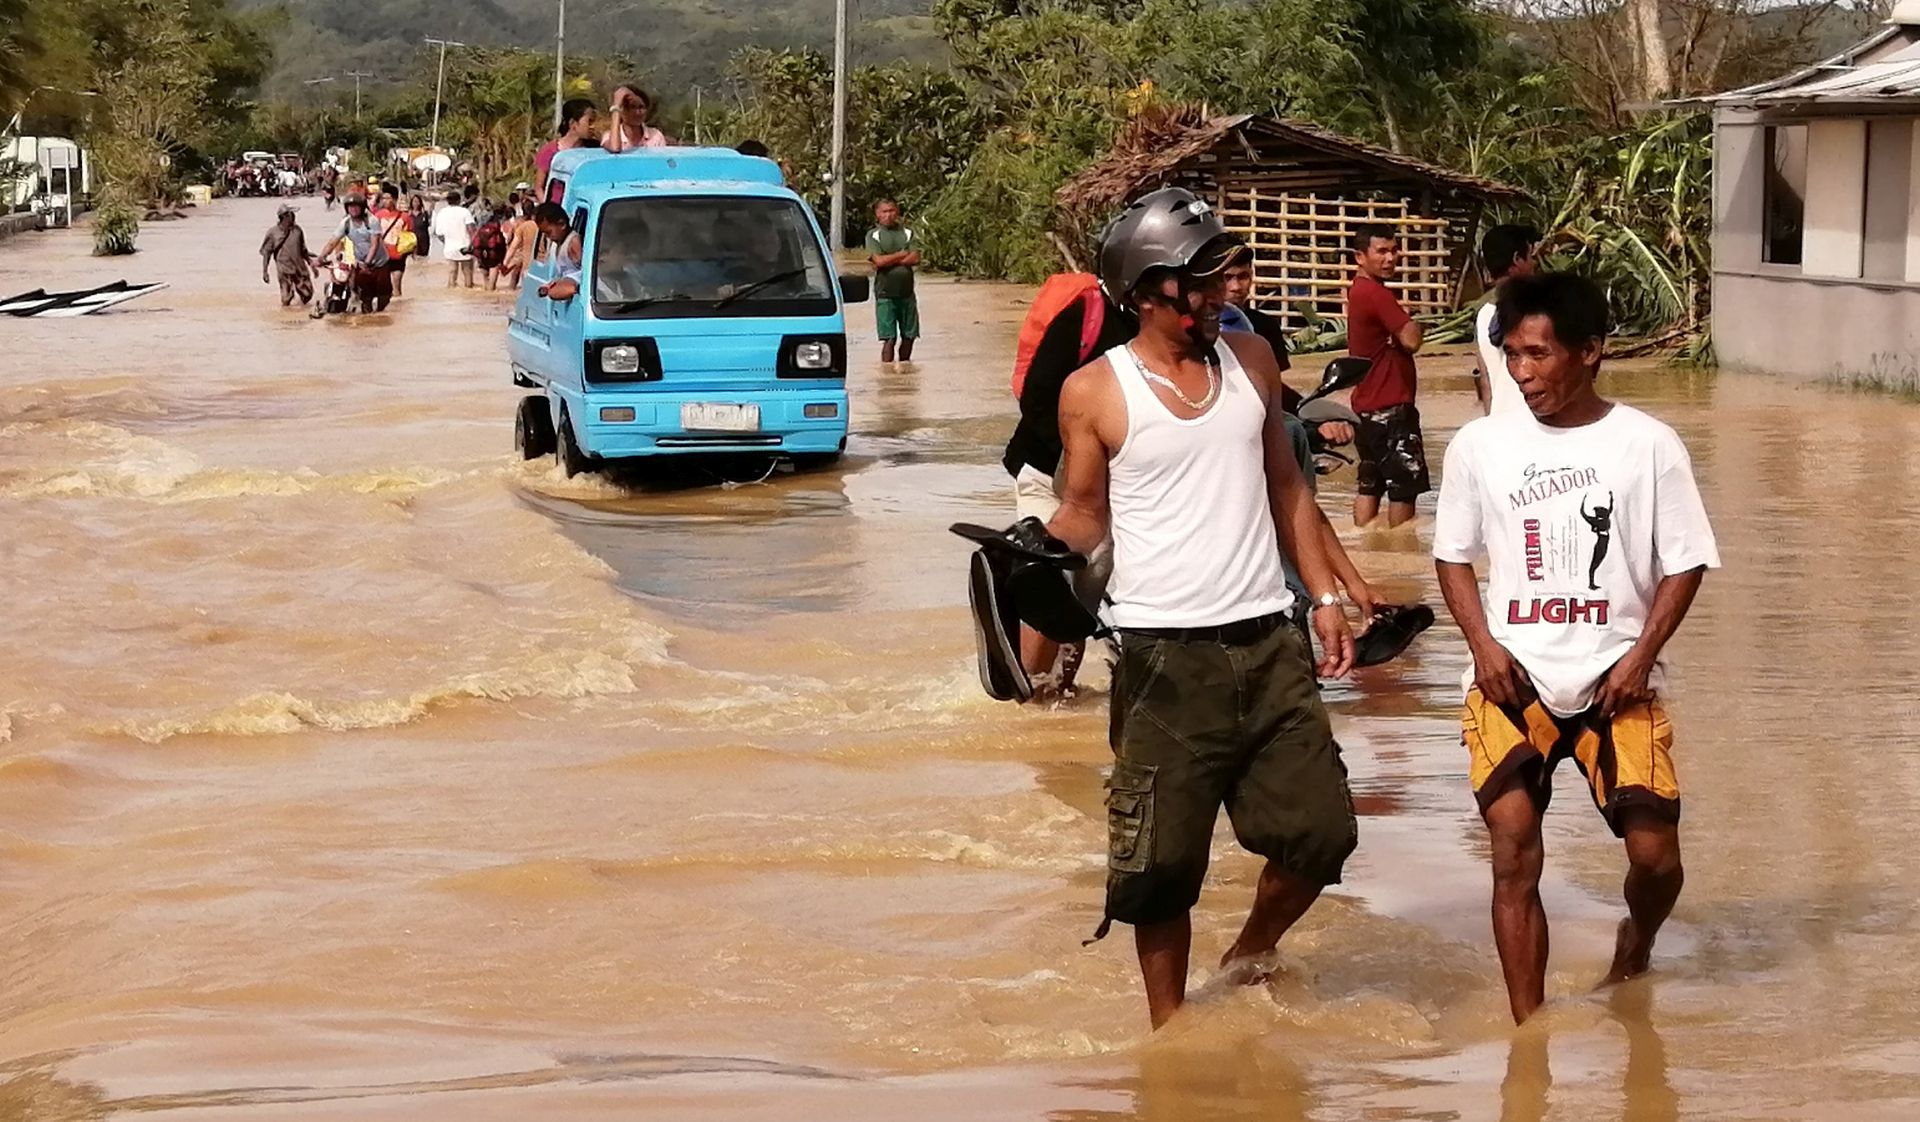 epa08089576 Motorists wade through water on a flooded road on Christmas day in the typhoon-hit city of Ormoc, Philippines, 25 December 2019. Typhoon Phanfone, (locally known as Ursula), made landfall in the Philippines with sustained winds of up to 150 kilometers per hour and caused cancellation at airports, seaports, and bus stations, affecting thousands of travelers on Christmas eve. Christmas is one of the busiest times of the year in the country, an archipelago made up of more than 7,000 islands with a population that is mostly Catholic.  EPA/ROBERT DEJON